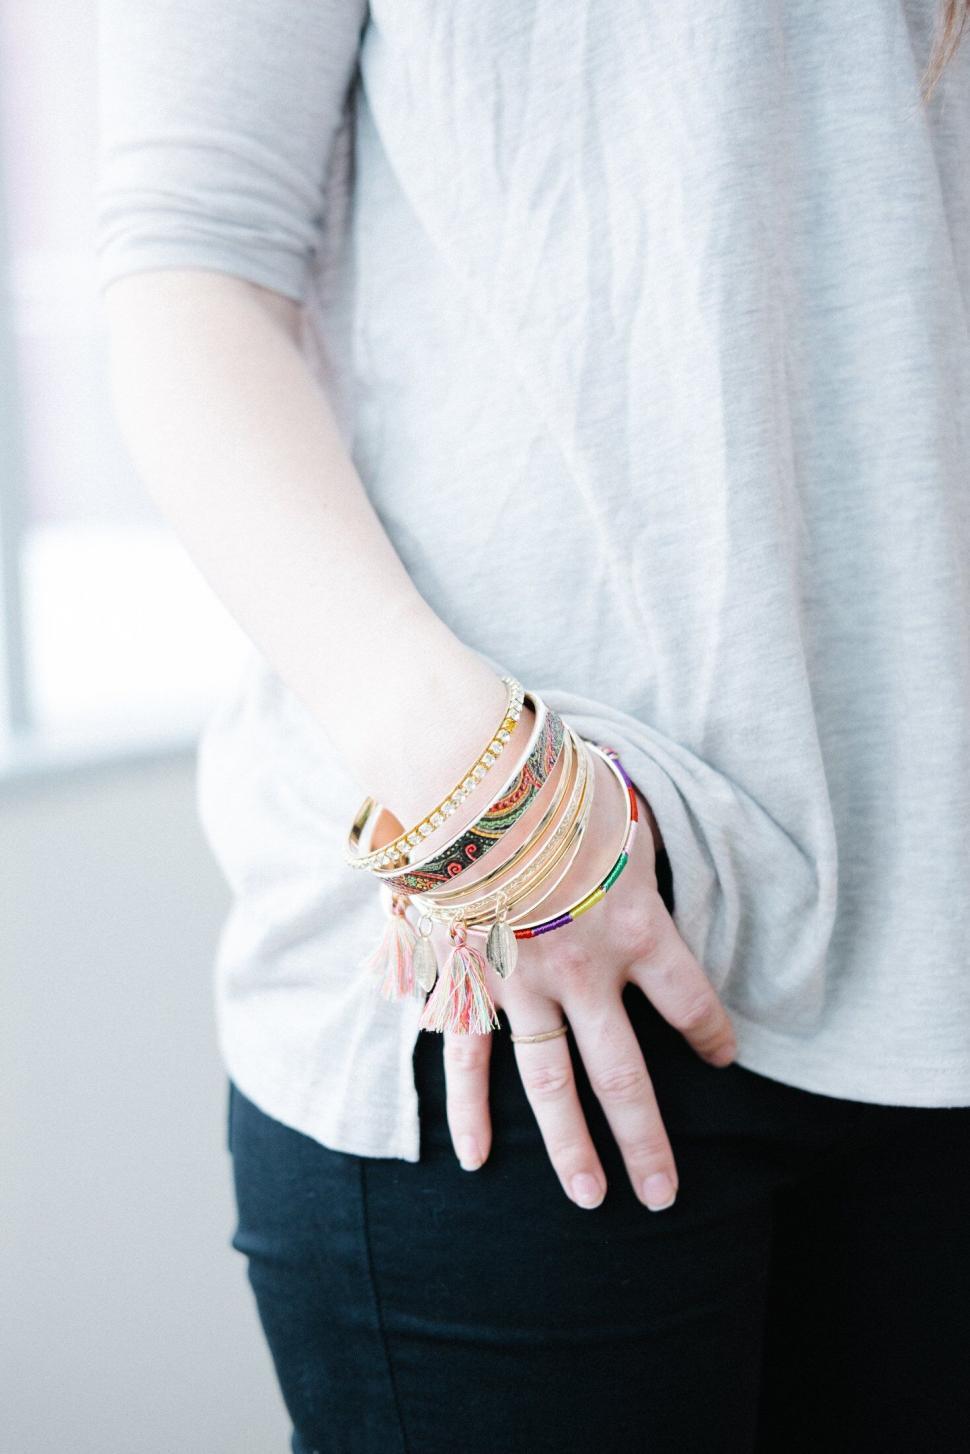 Free Image of Arm adorned with an array of colorful bracelets 